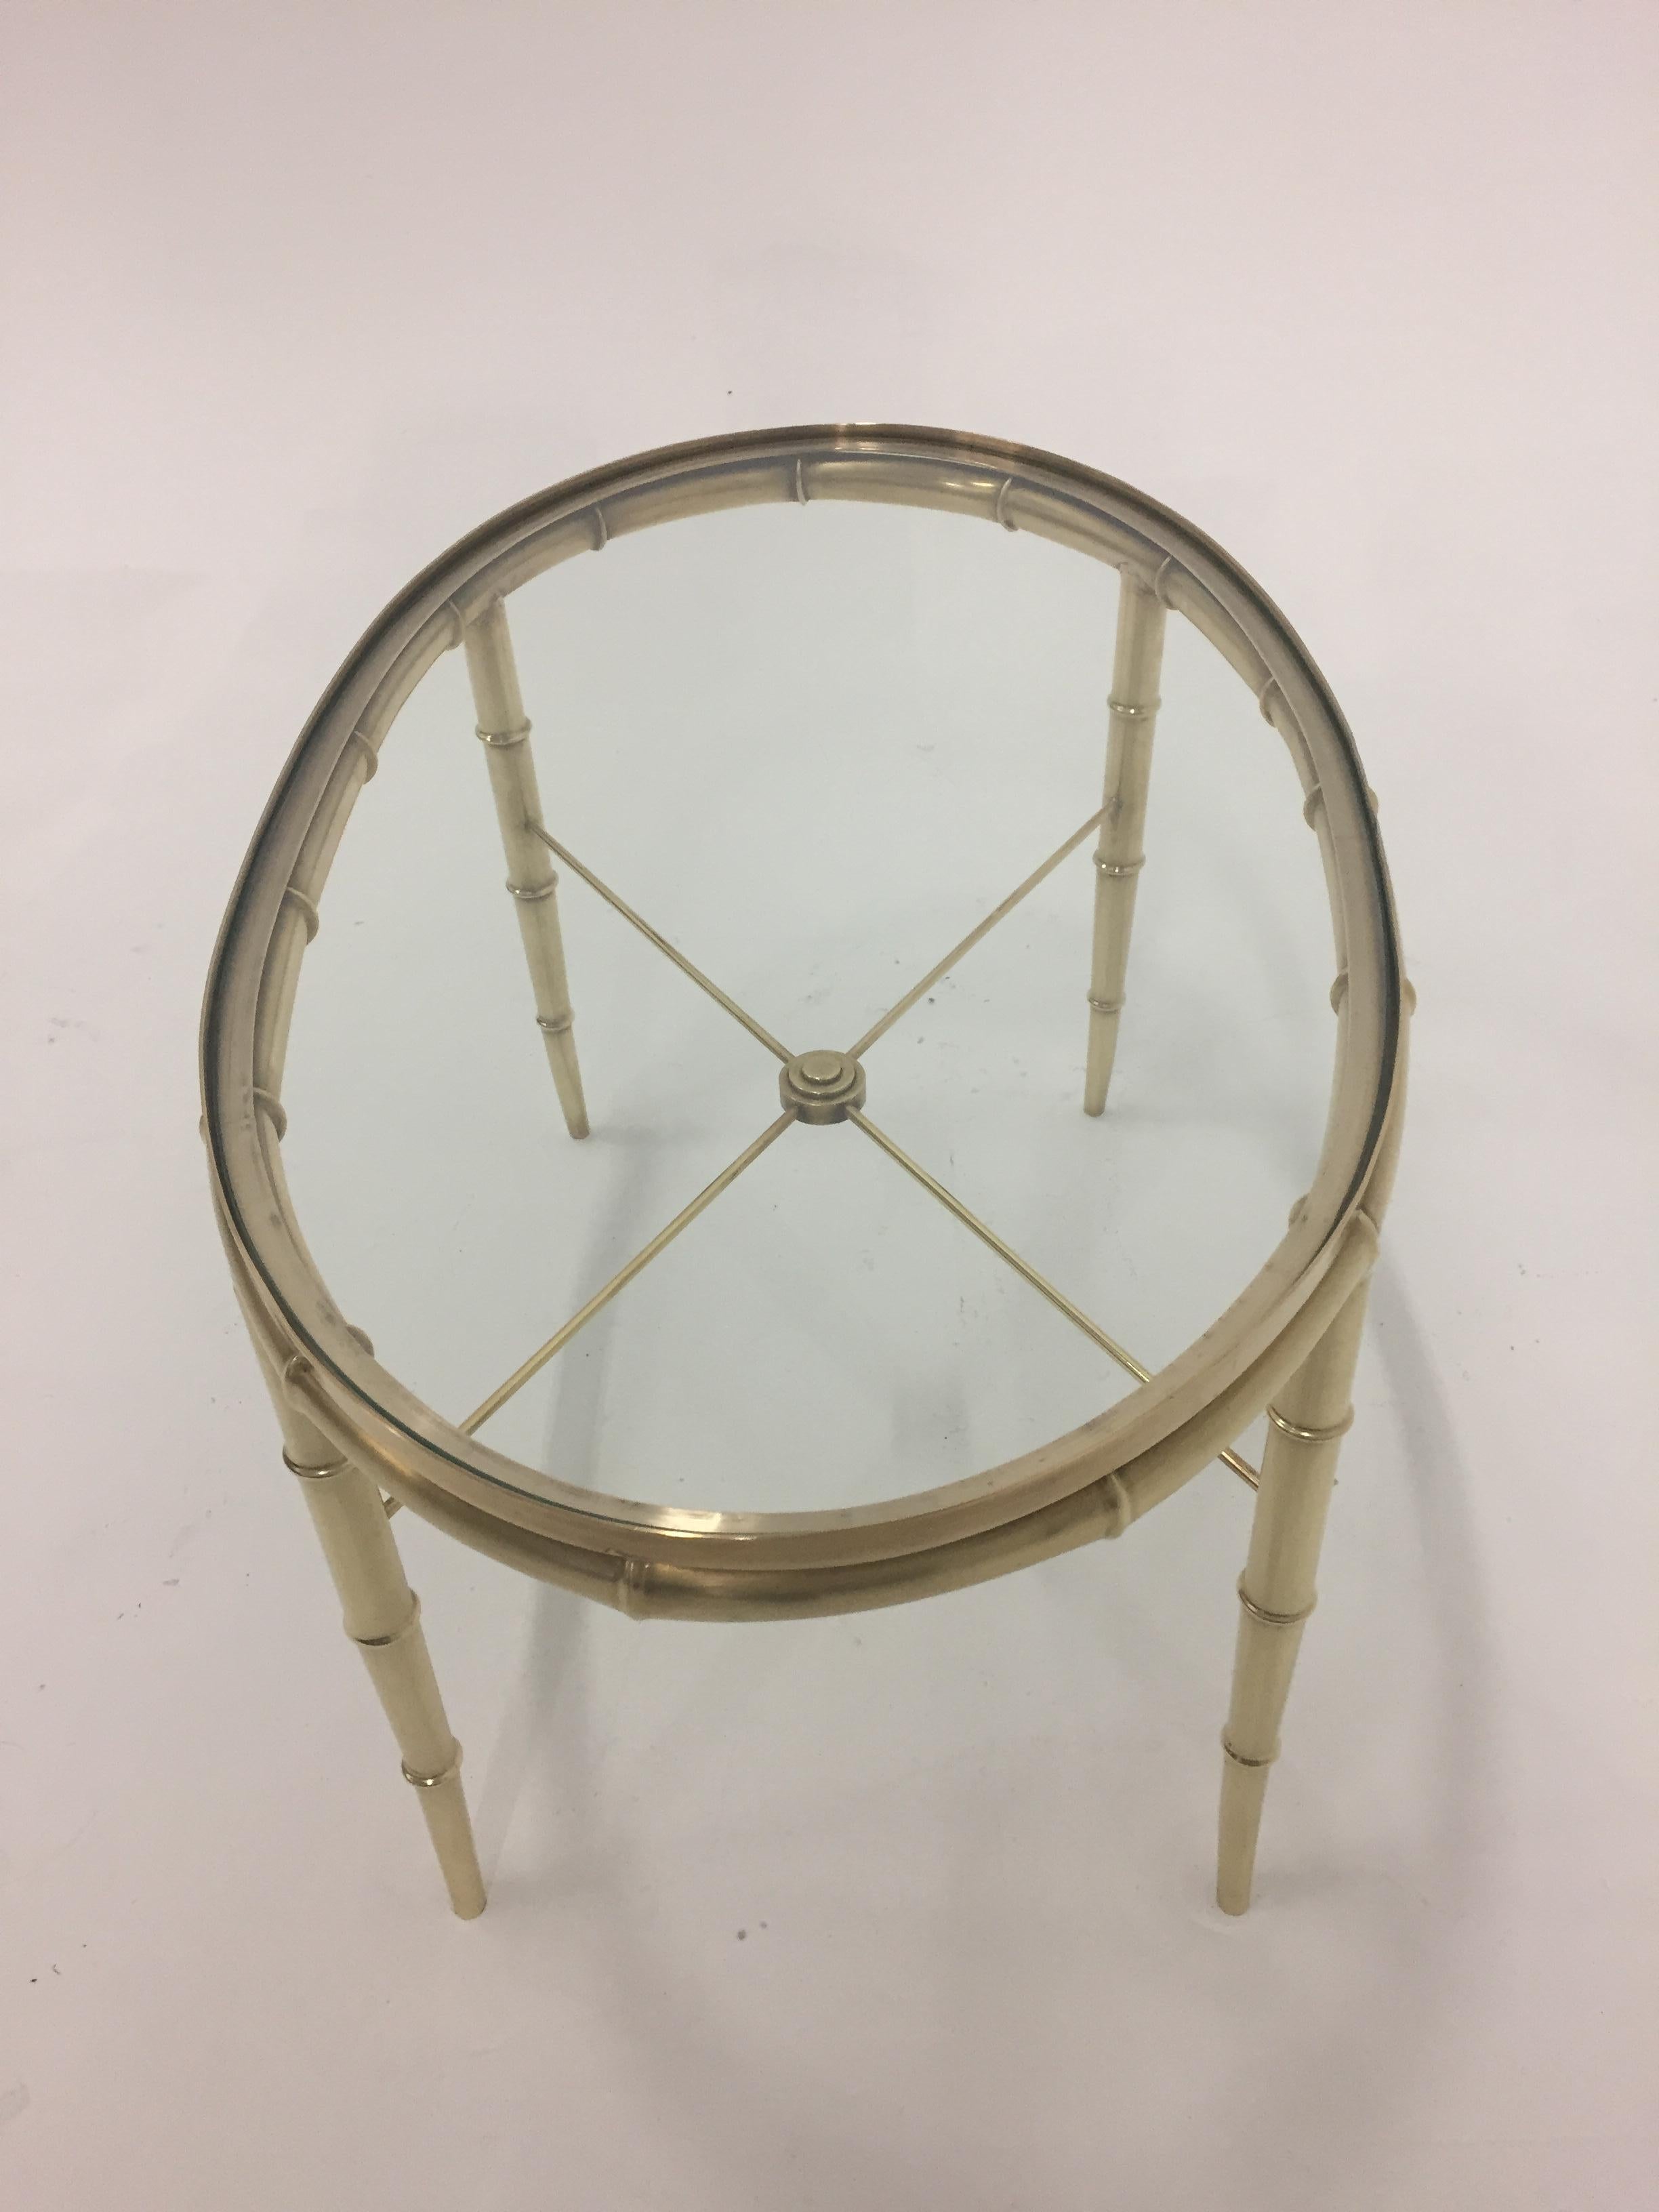 Very elegant solid brass vintage oval coffee table having faux bamboo style, gorgeous thin stretcher beneath with pretty center finial, glass top and newly polished lustre.